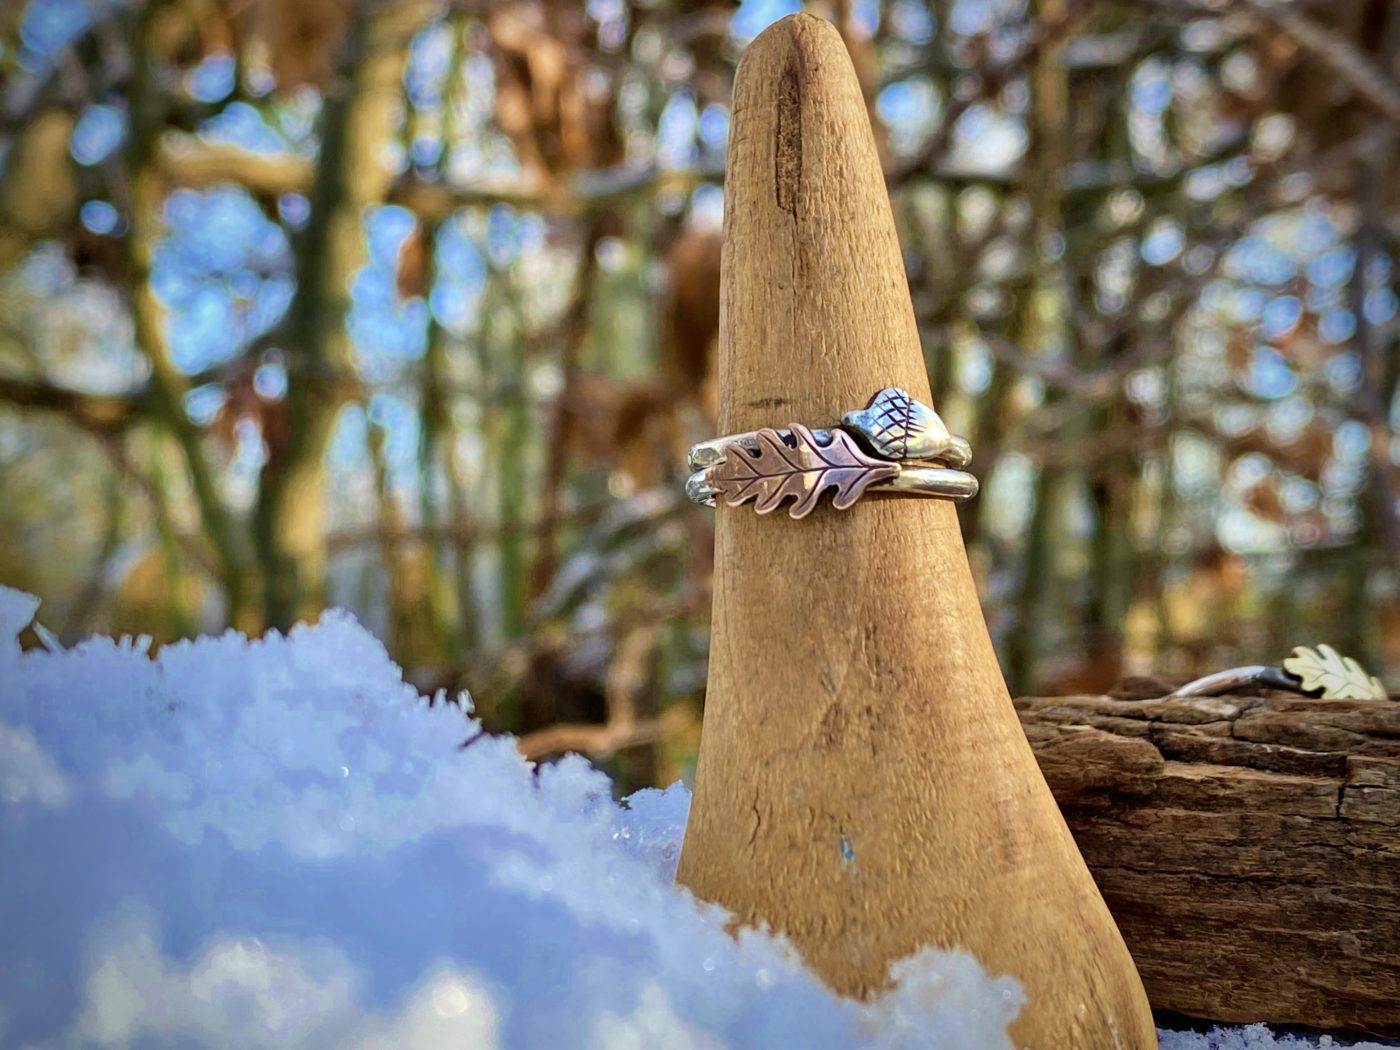 acorn and oak leaf jewellery, silver copper and bronze rings made from ethical recycled raw materials. Precious, lovely keepsake jewellery